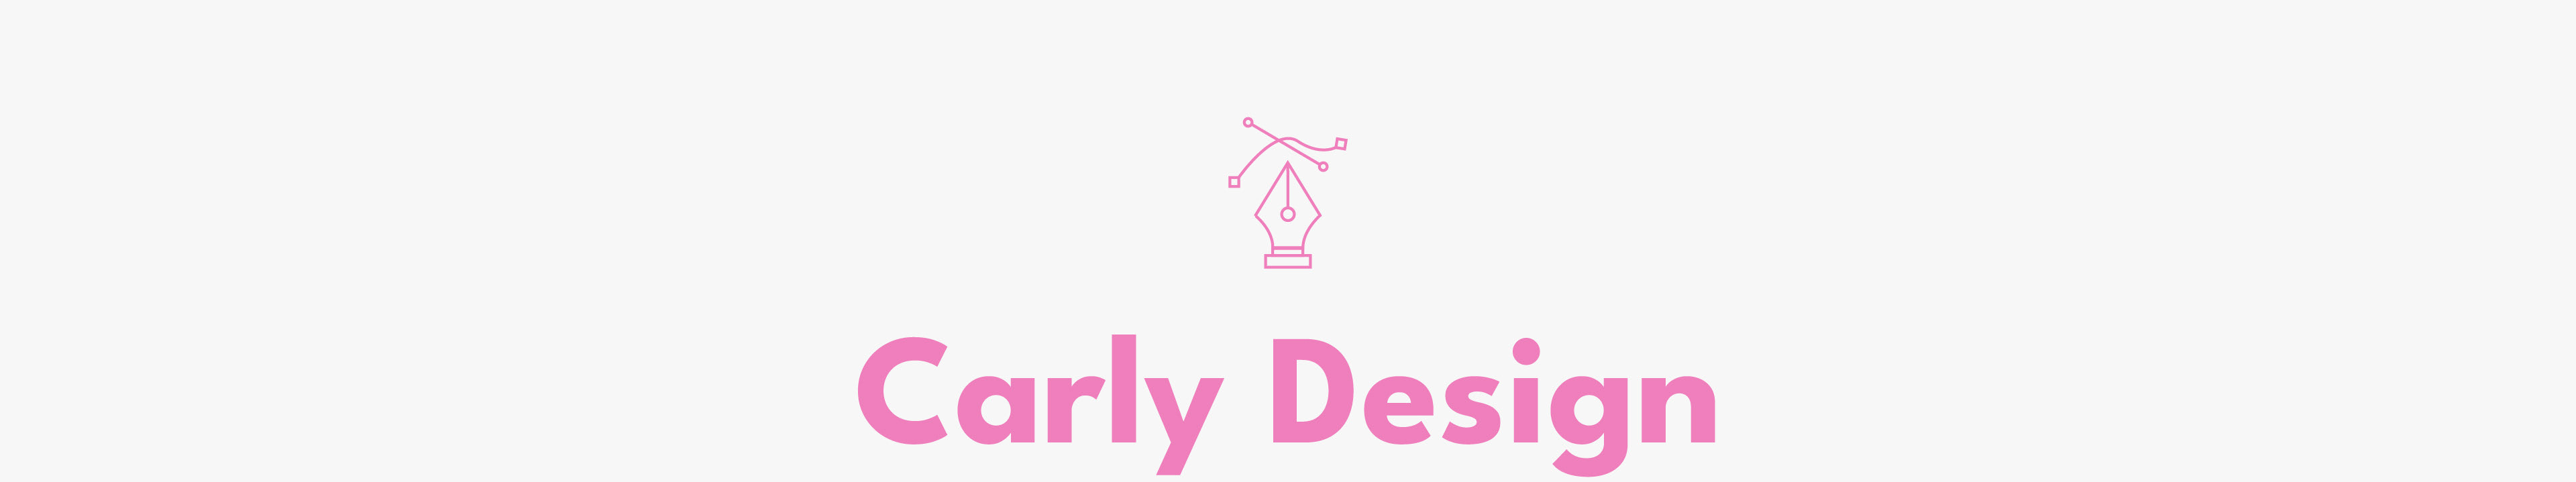 Carly Designs profilbanner